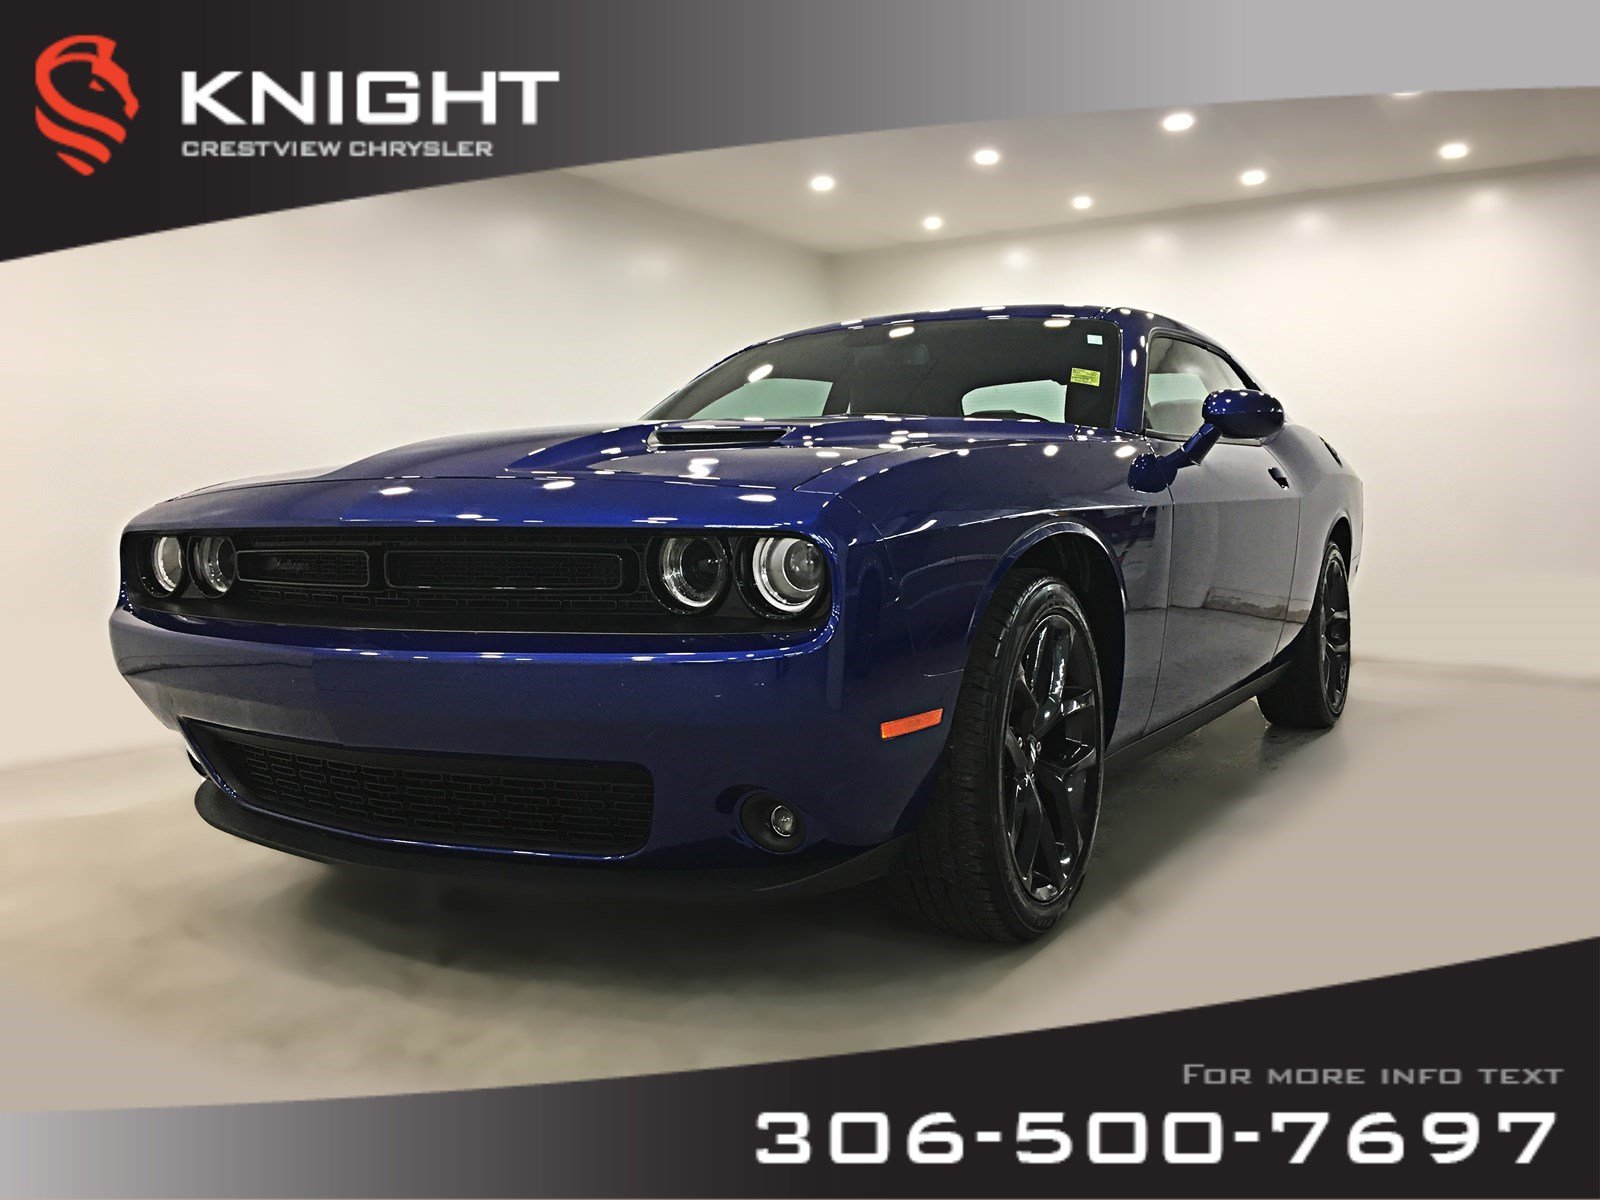 Certified Pre Owned 2019 Dodge Challenger Sxt Plus Leather Sunroof Navigation With Navigation